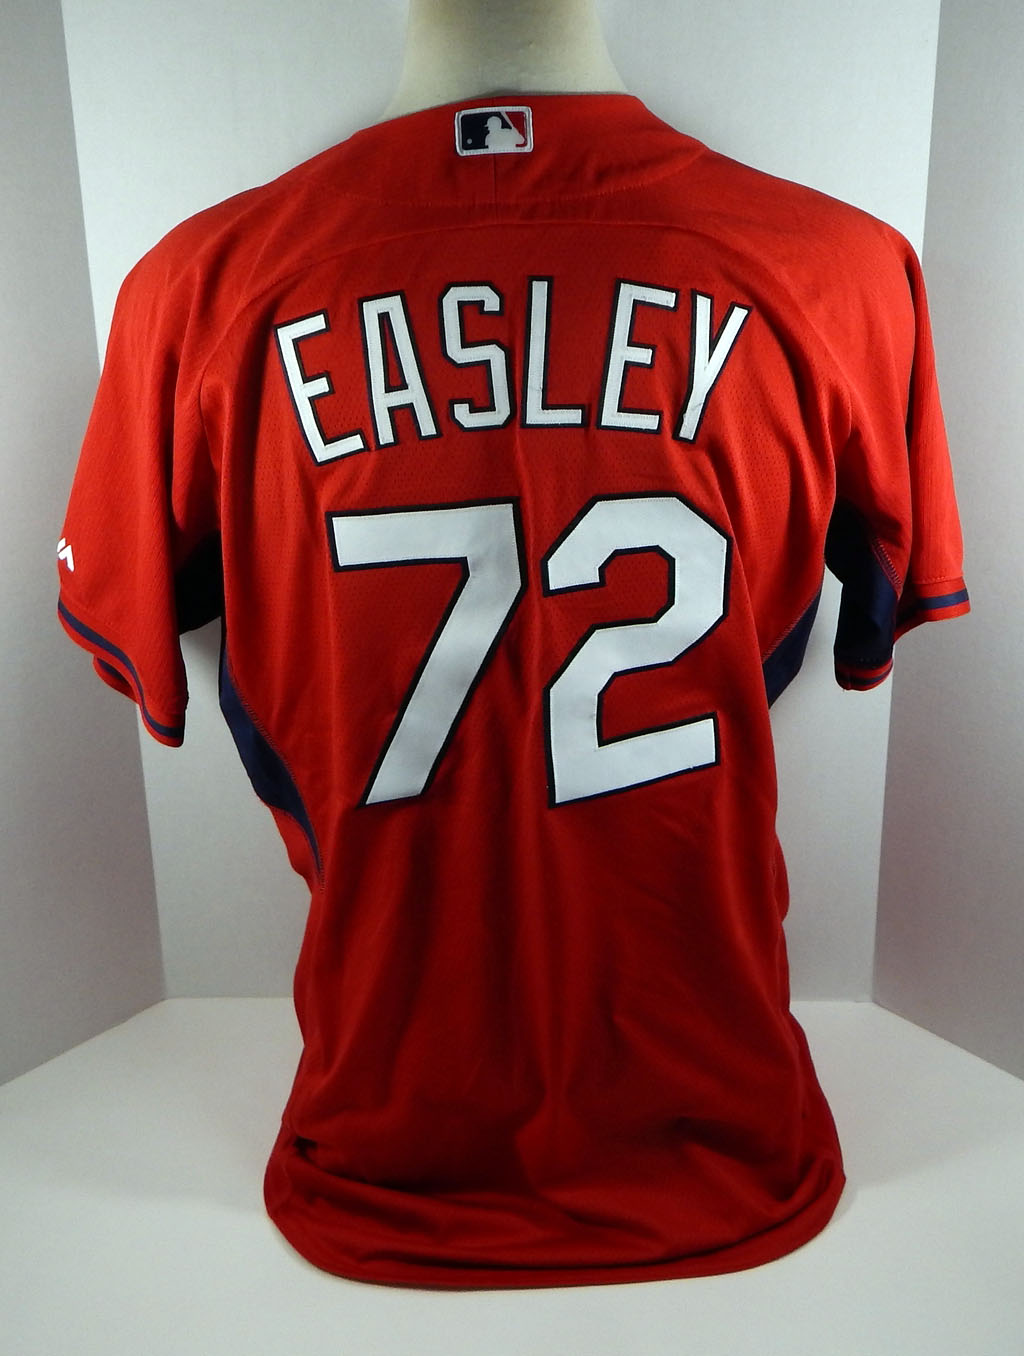 2015 St. Louis Cardinals Ed Easley #72 Game Issued Pos ...